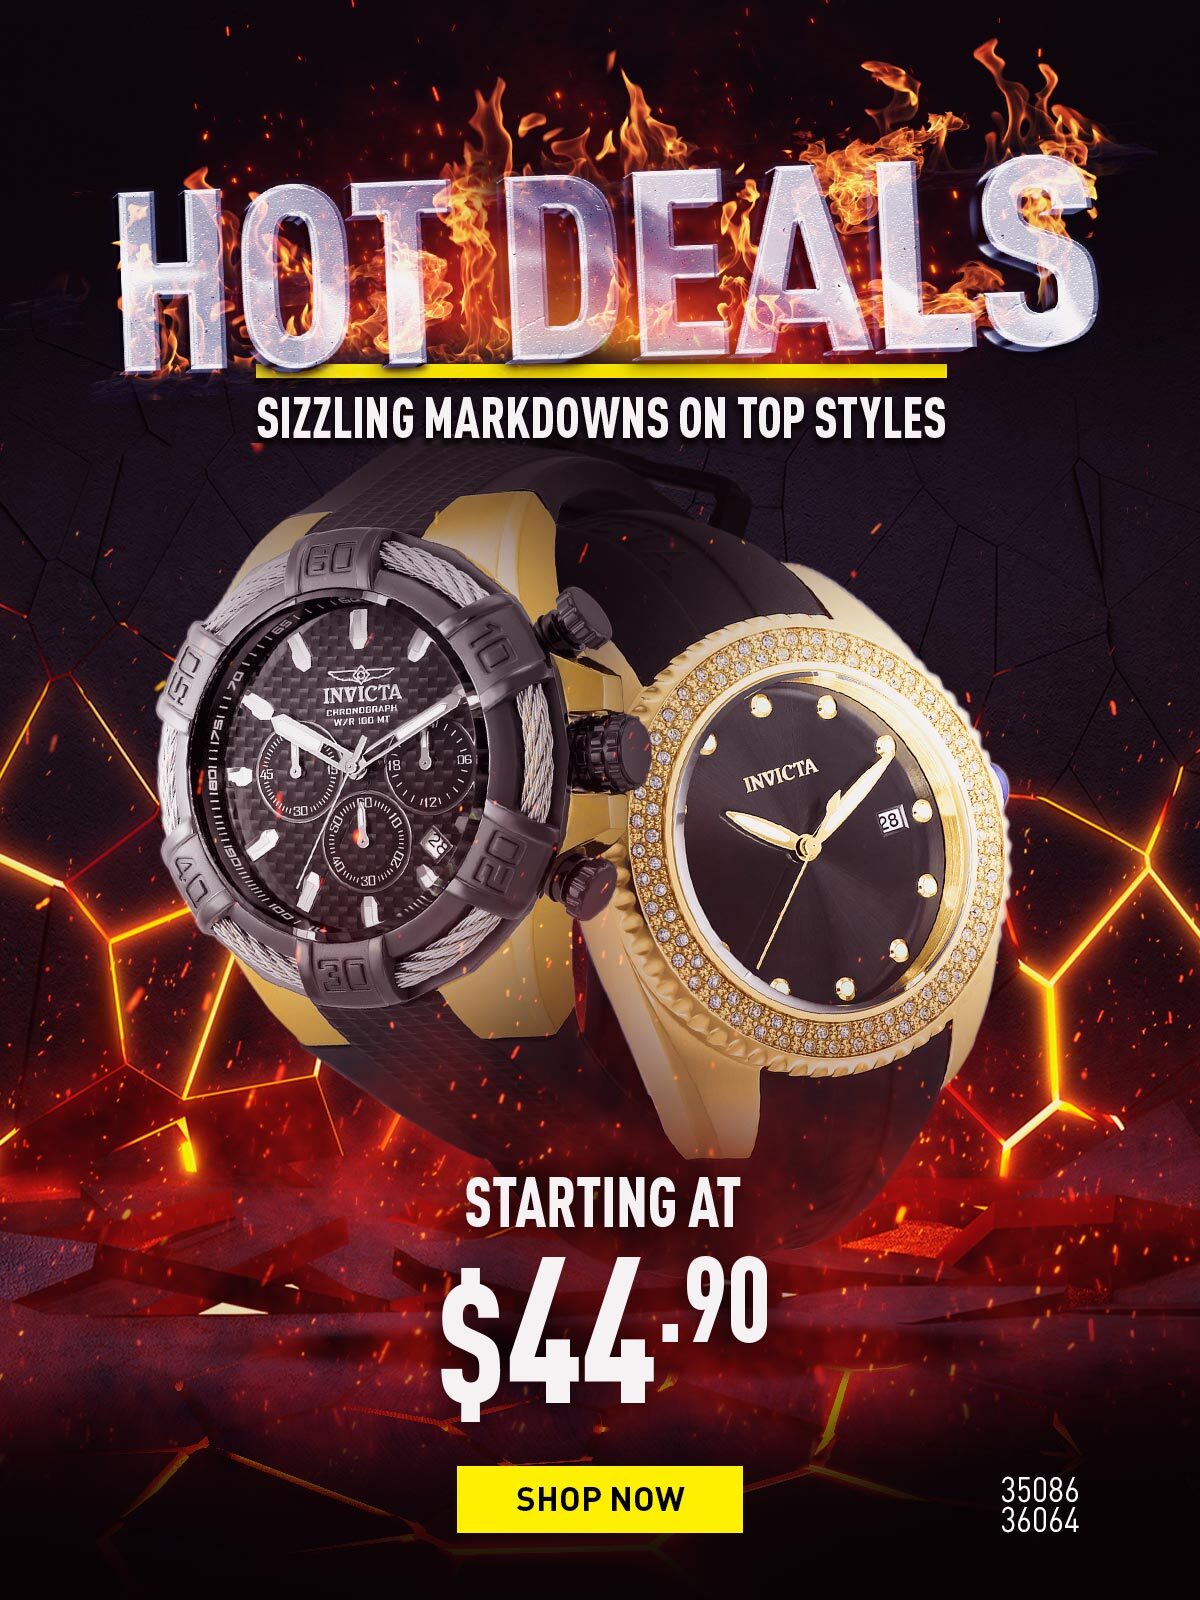 Hot Deals - Sizzling markdowns on top styles